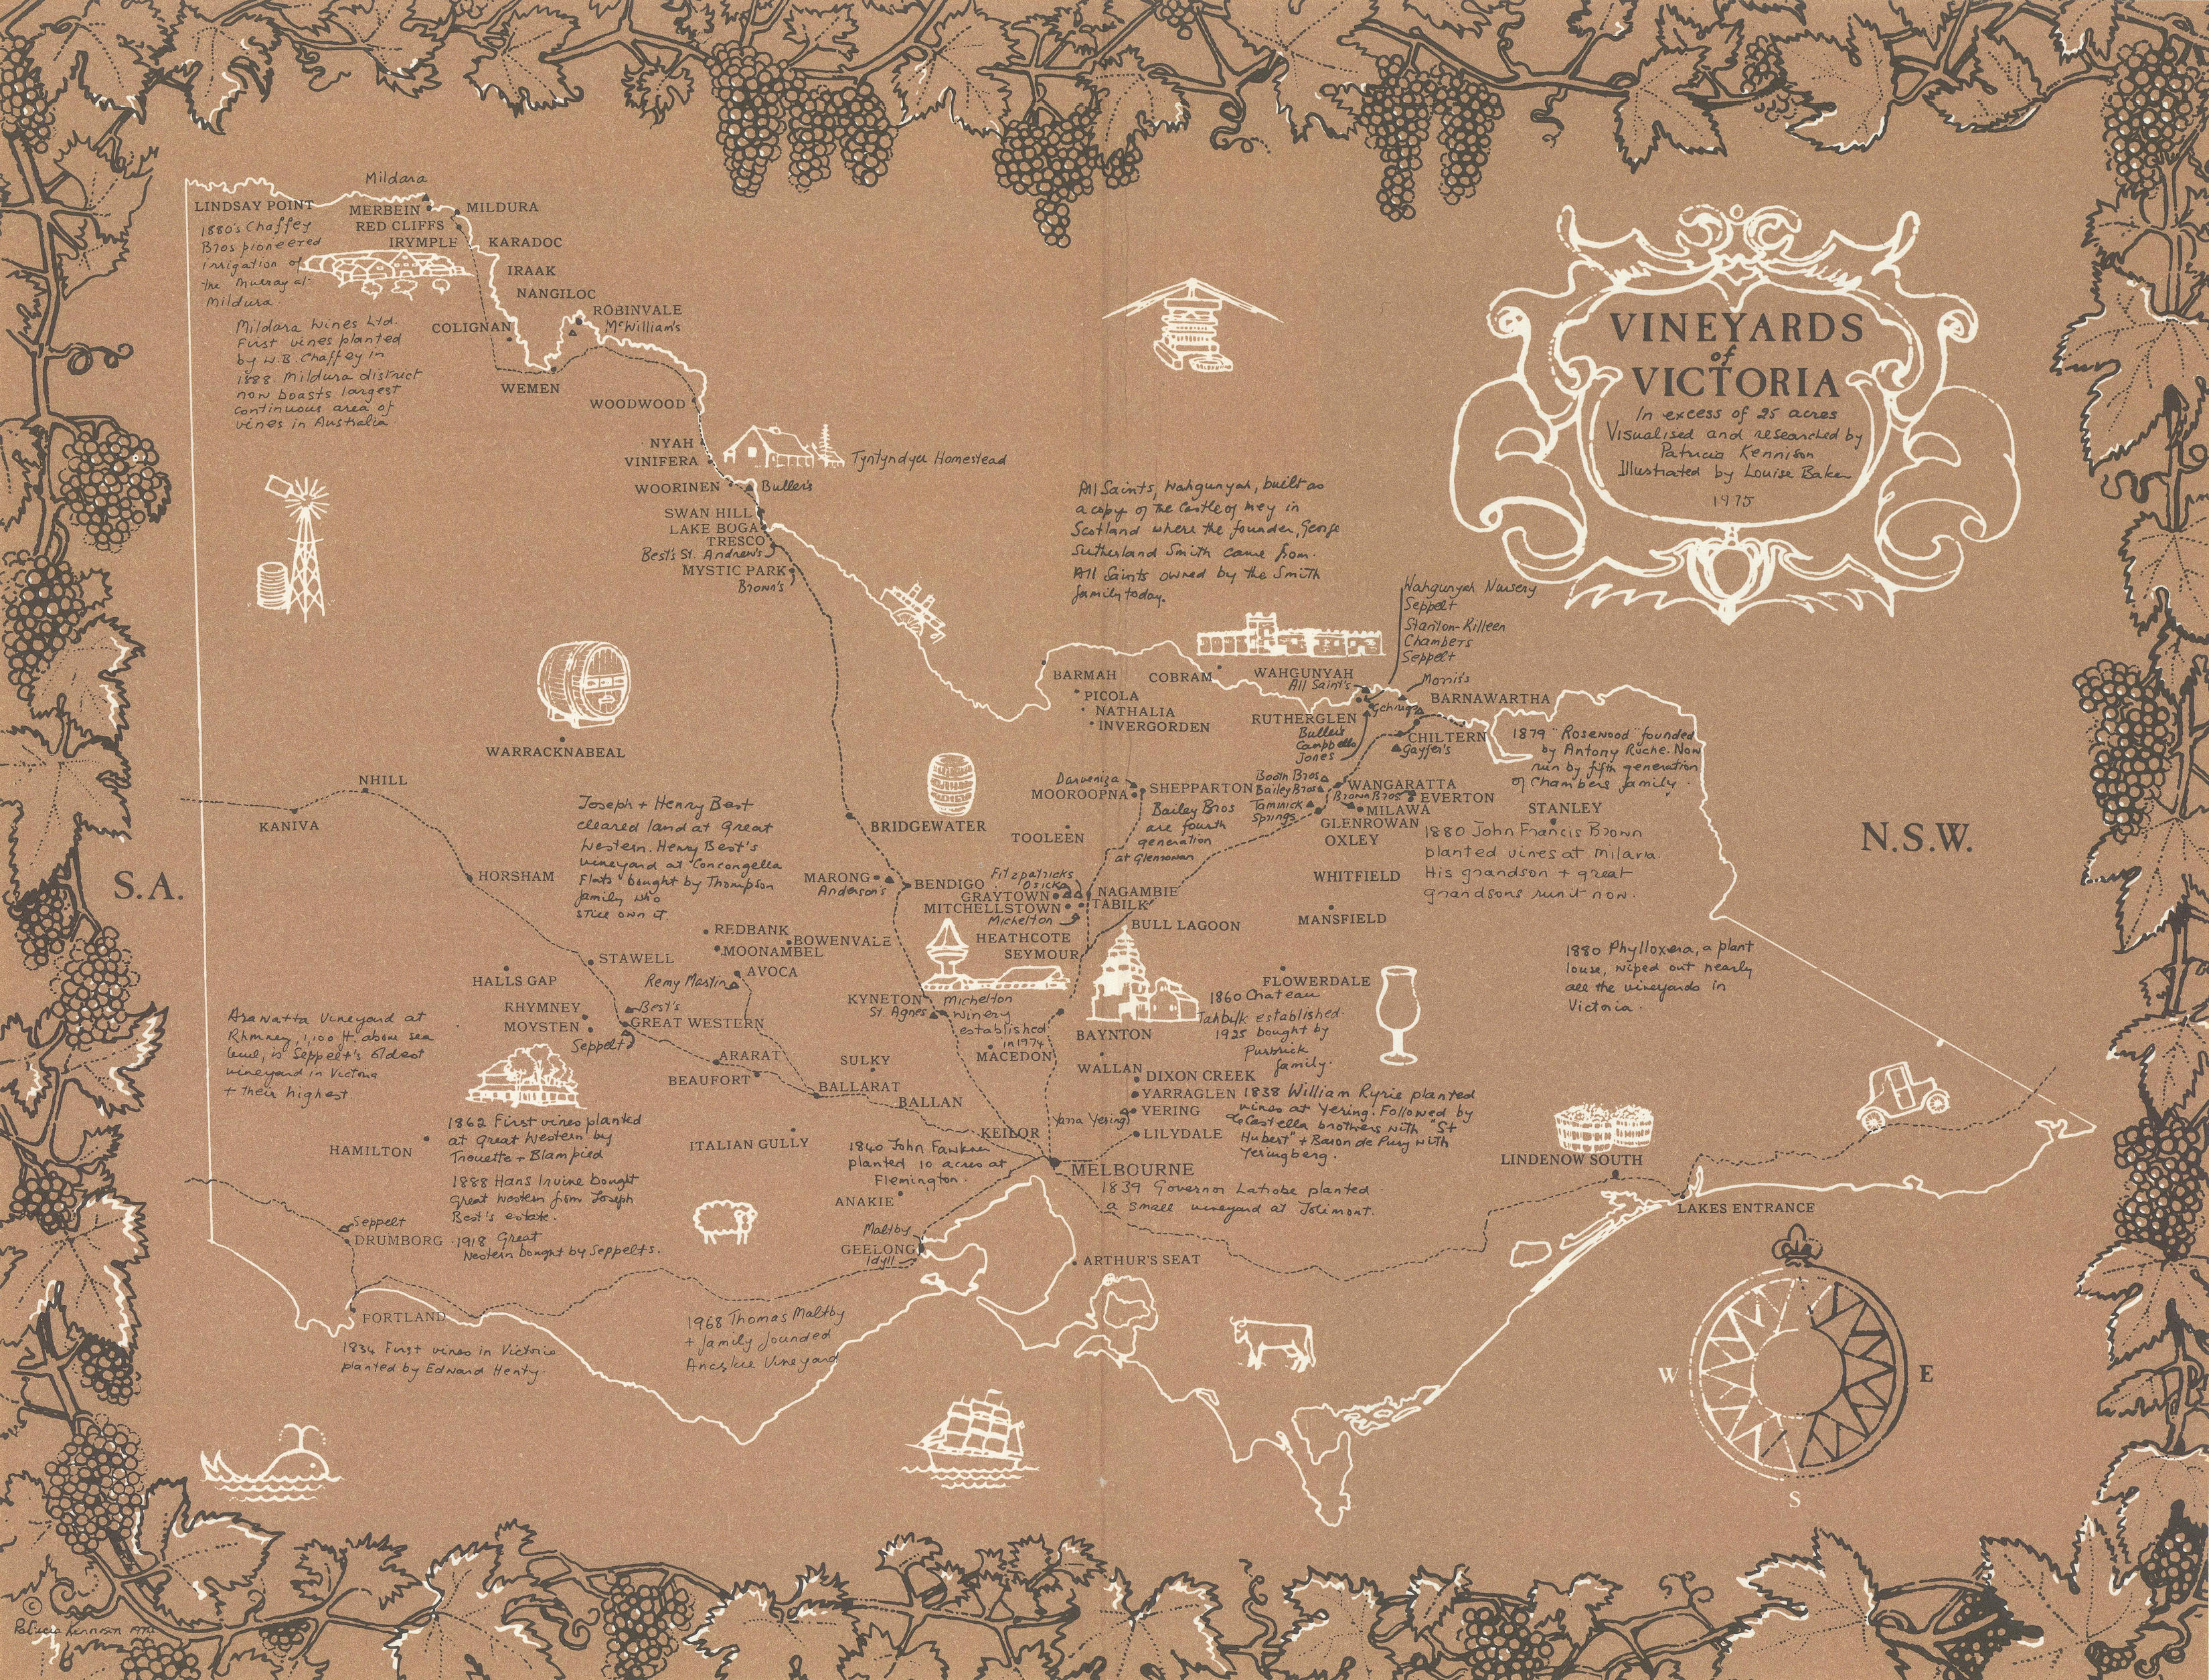 Associate Product Vineyards of Victoria, by Patricia Kennison & Louise Baker. Wine 1975 old map